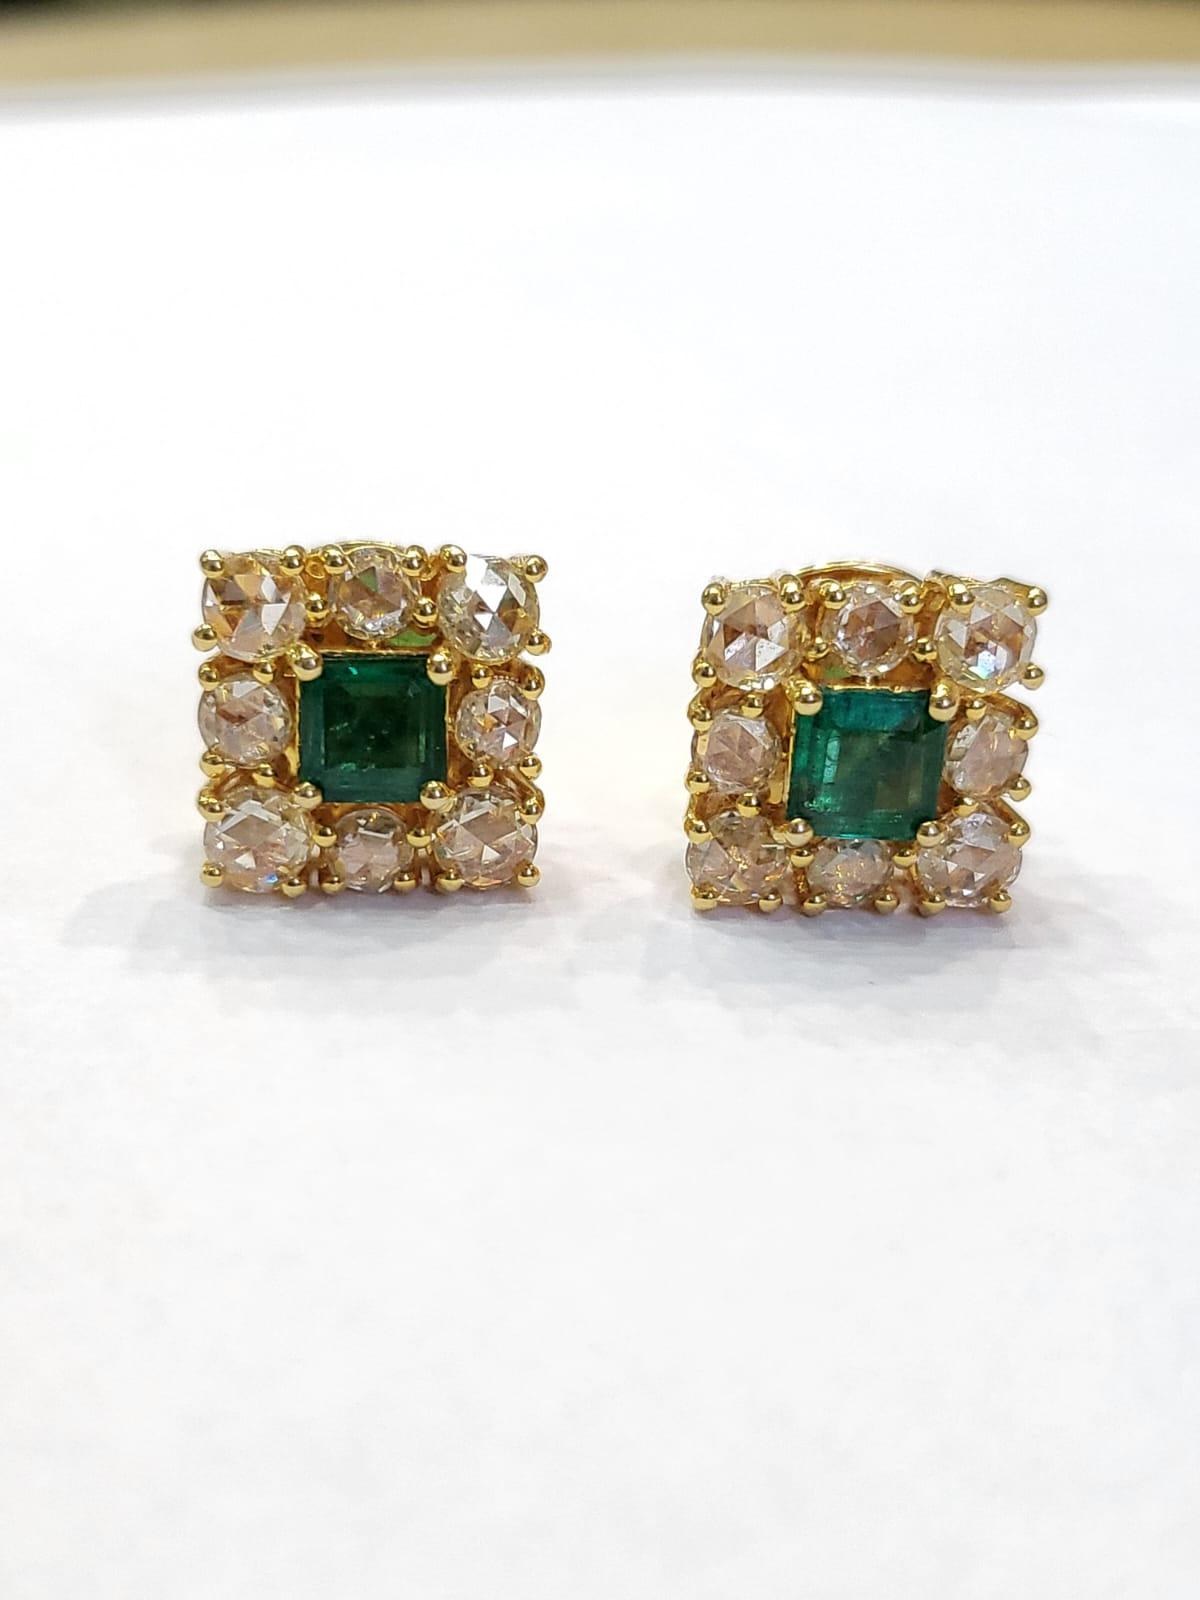 A very chic and wearable, Emerald Stud Earrings set in 18K Yellow Gold & Diamonds. The weight of the square Emeralds are 0.94 carats. The Emeralds are completely natural, without any treatment and are of Zambian origin. The weight of the Yellow Rose